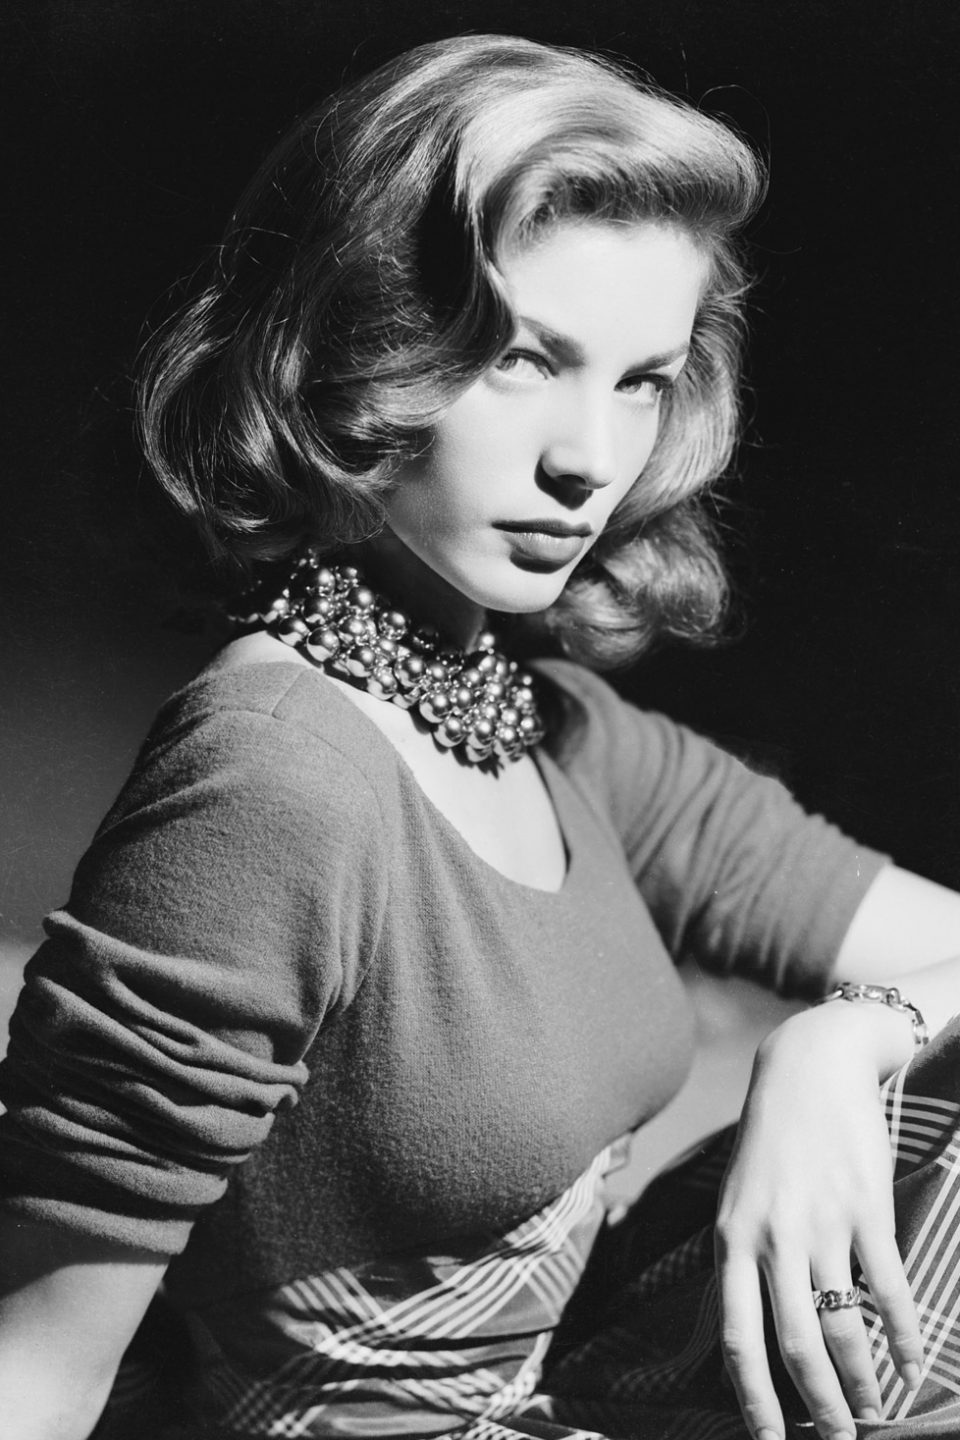 The Bacall Look